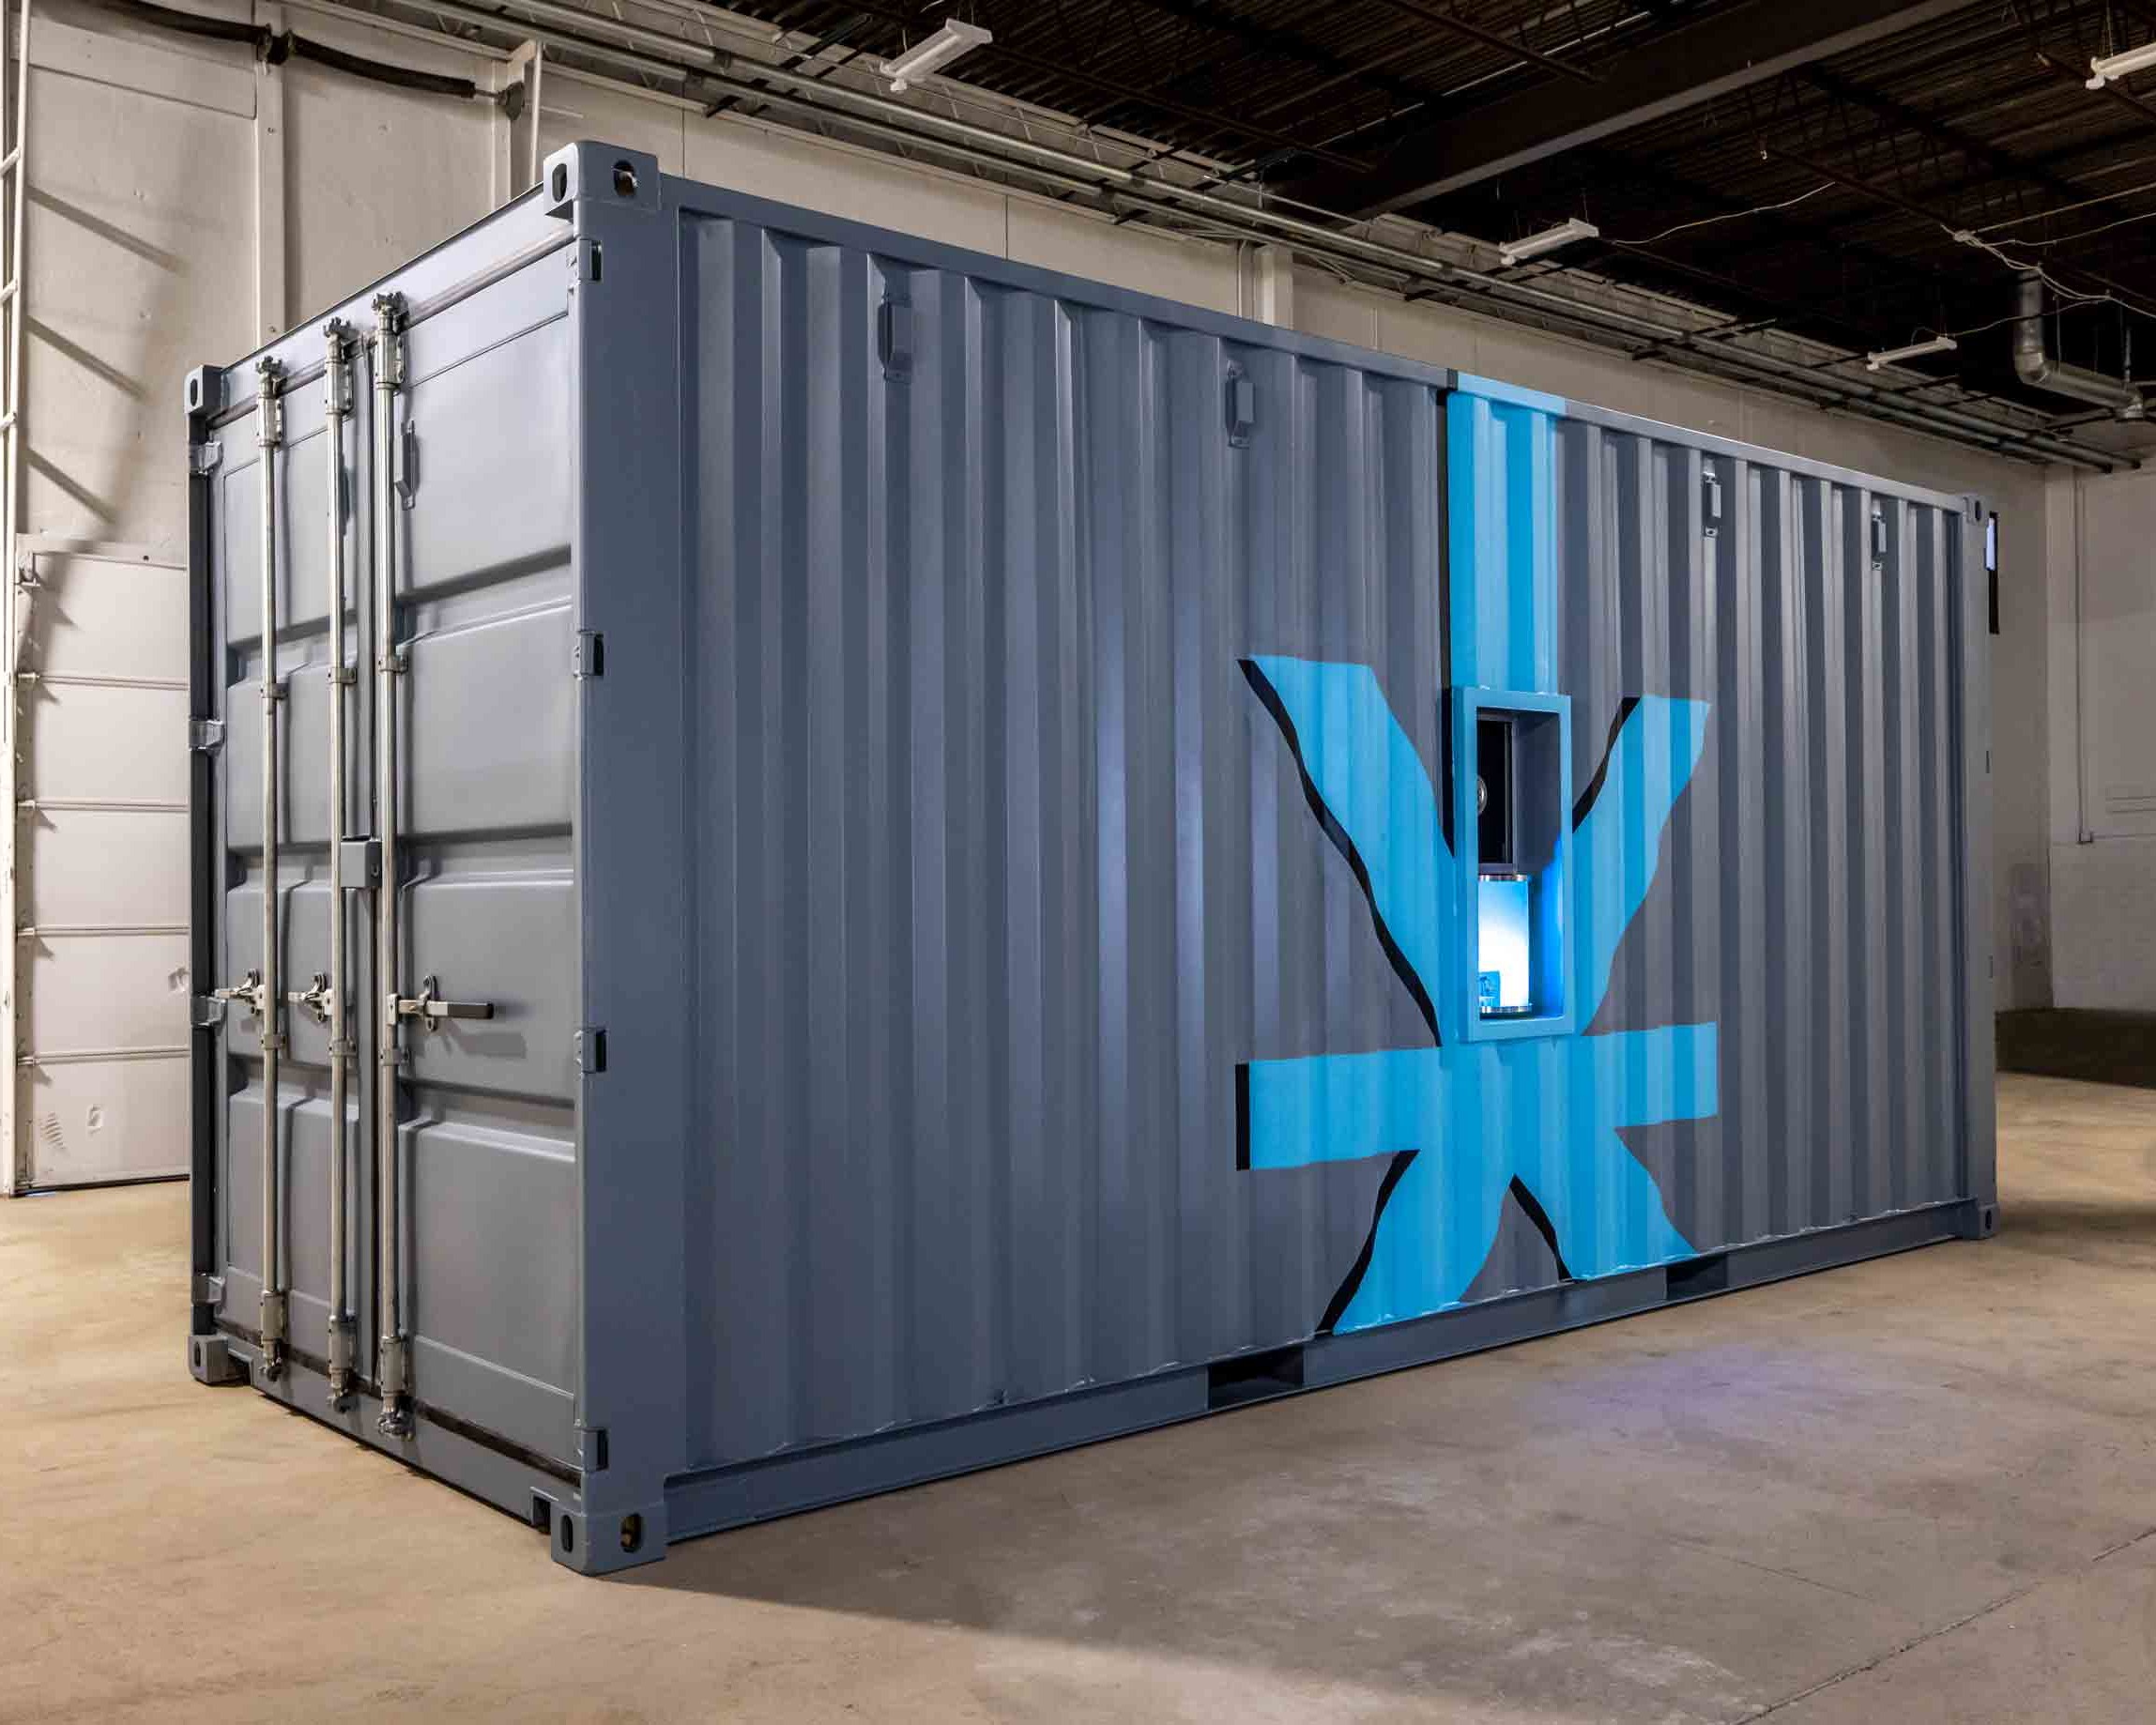 ROXBOX Containers RxBX ghost dispensary, the world's first ghost dispensary changing the game in the cannabis industry.